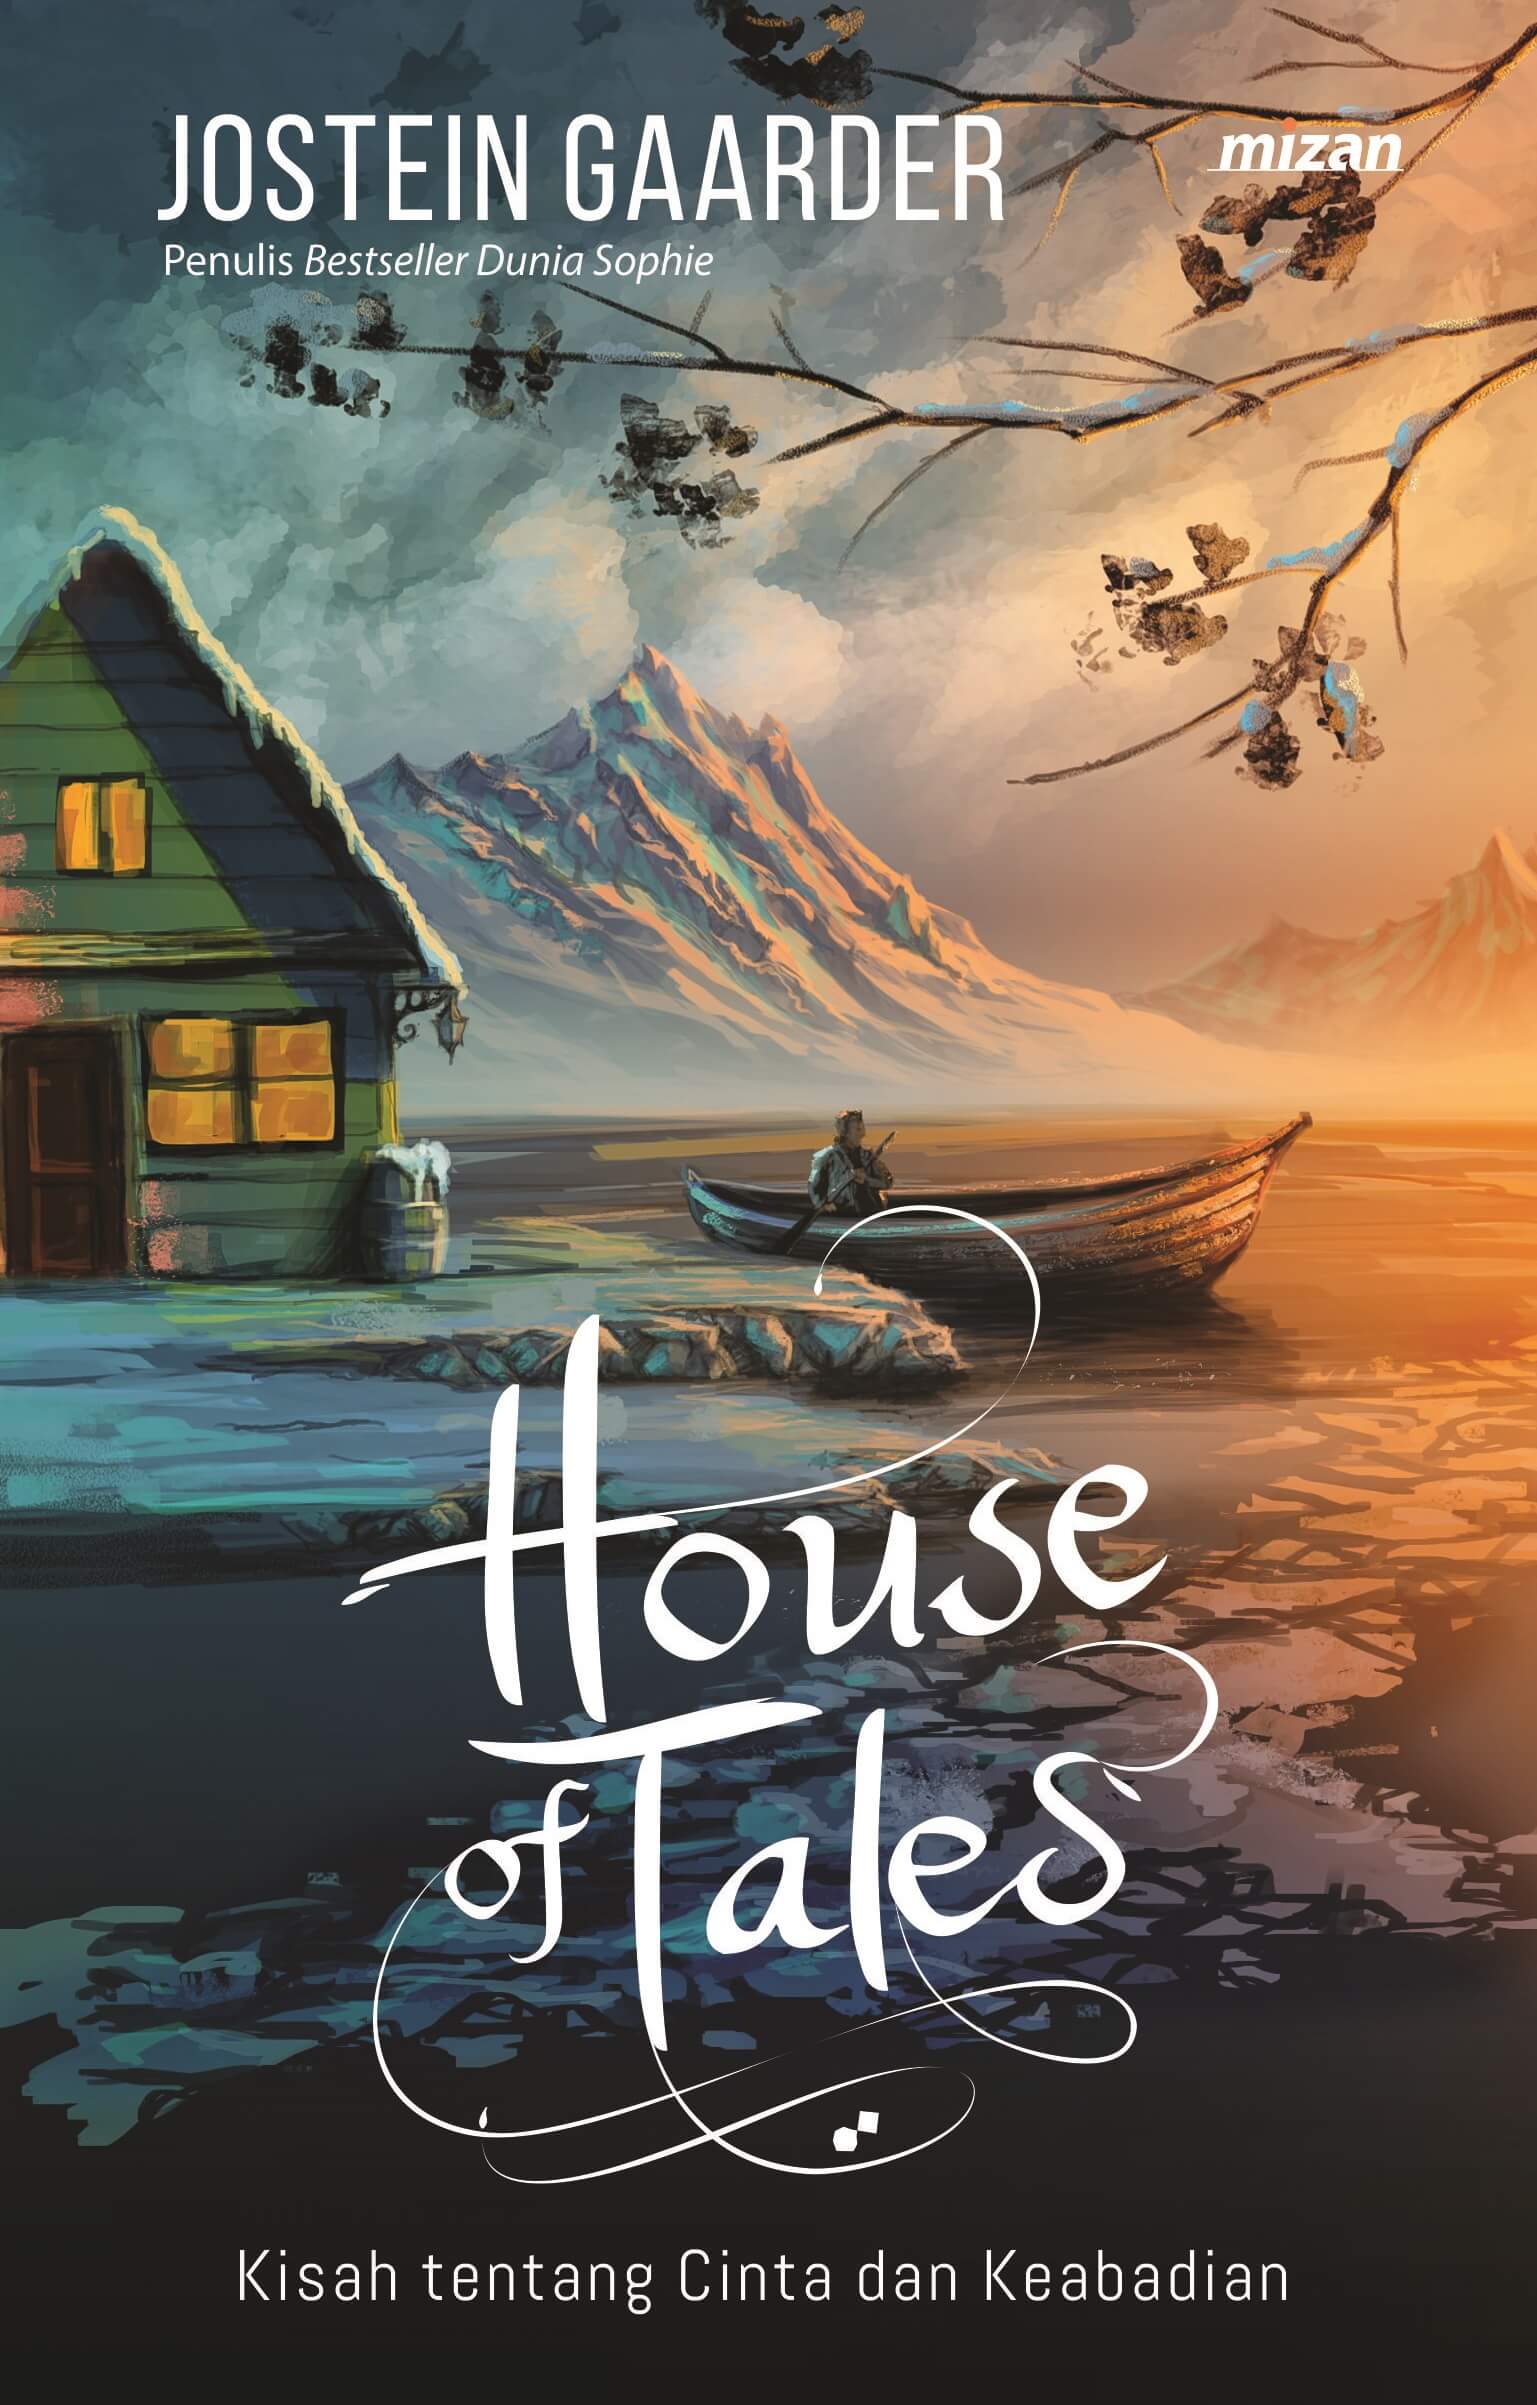 HOUSE OF TALES